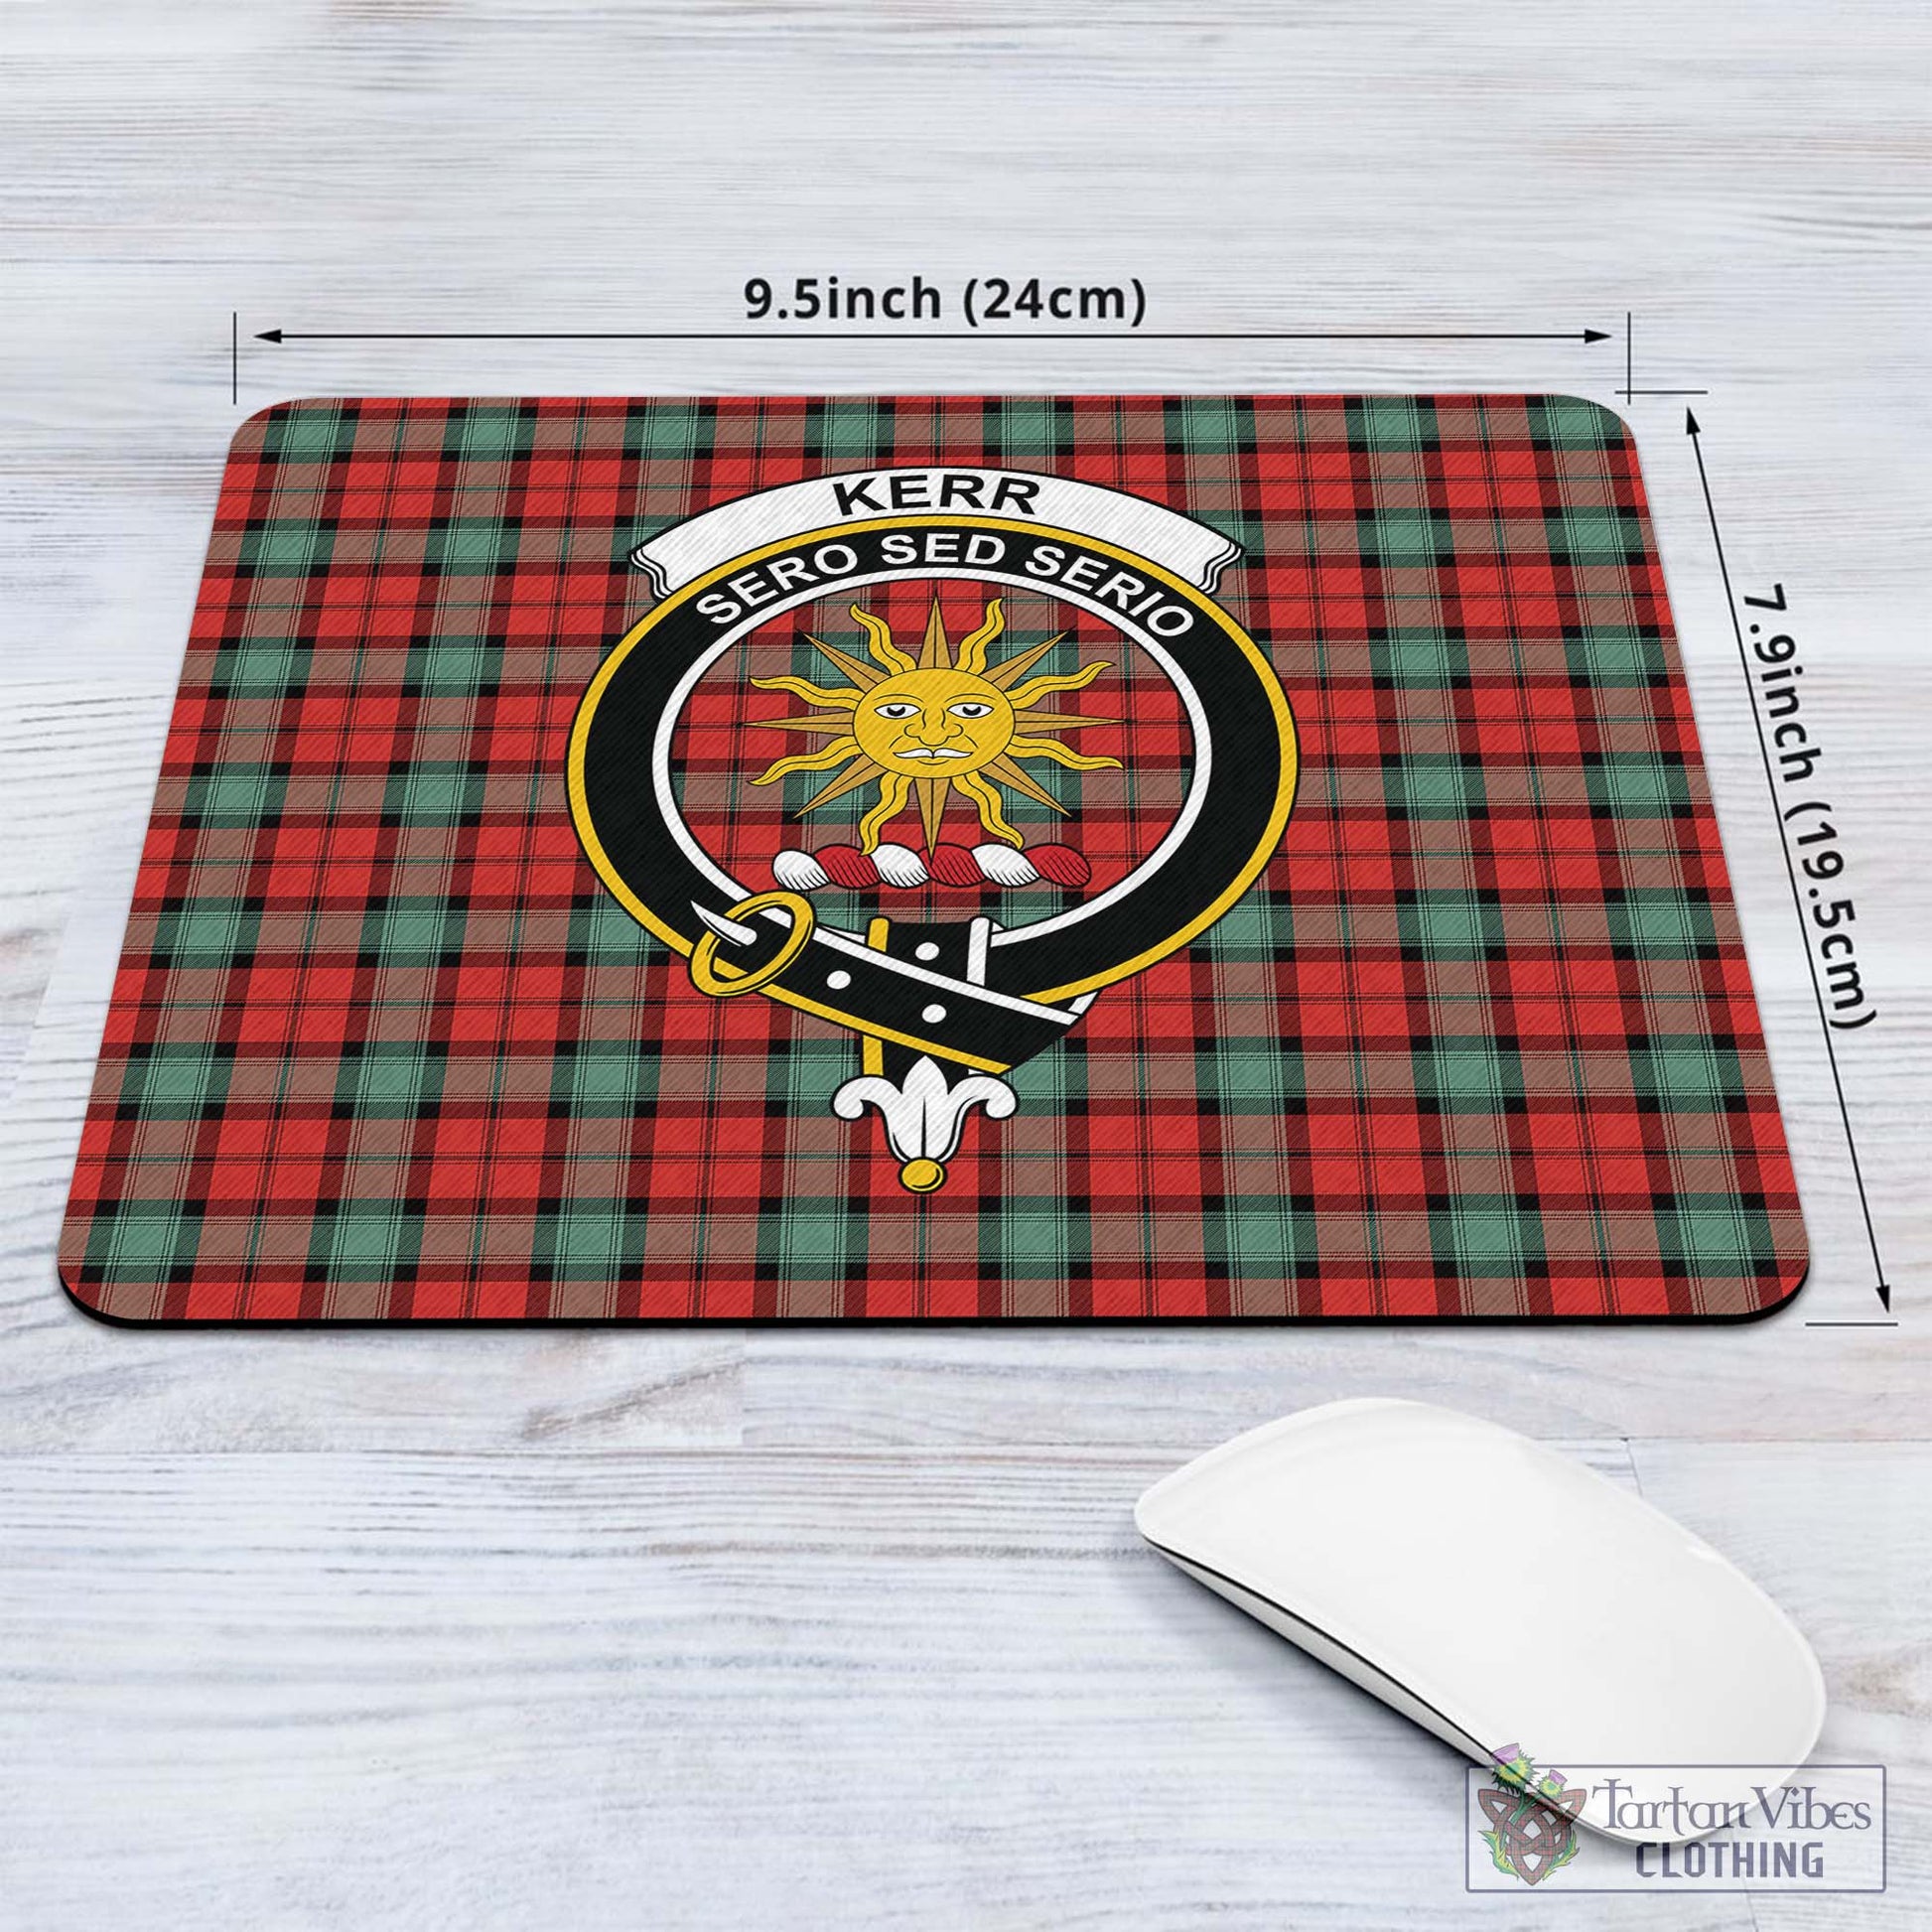 Tartan Vibes Clothing Kerr Ancient Tartan Mouse Pad with Family Crest